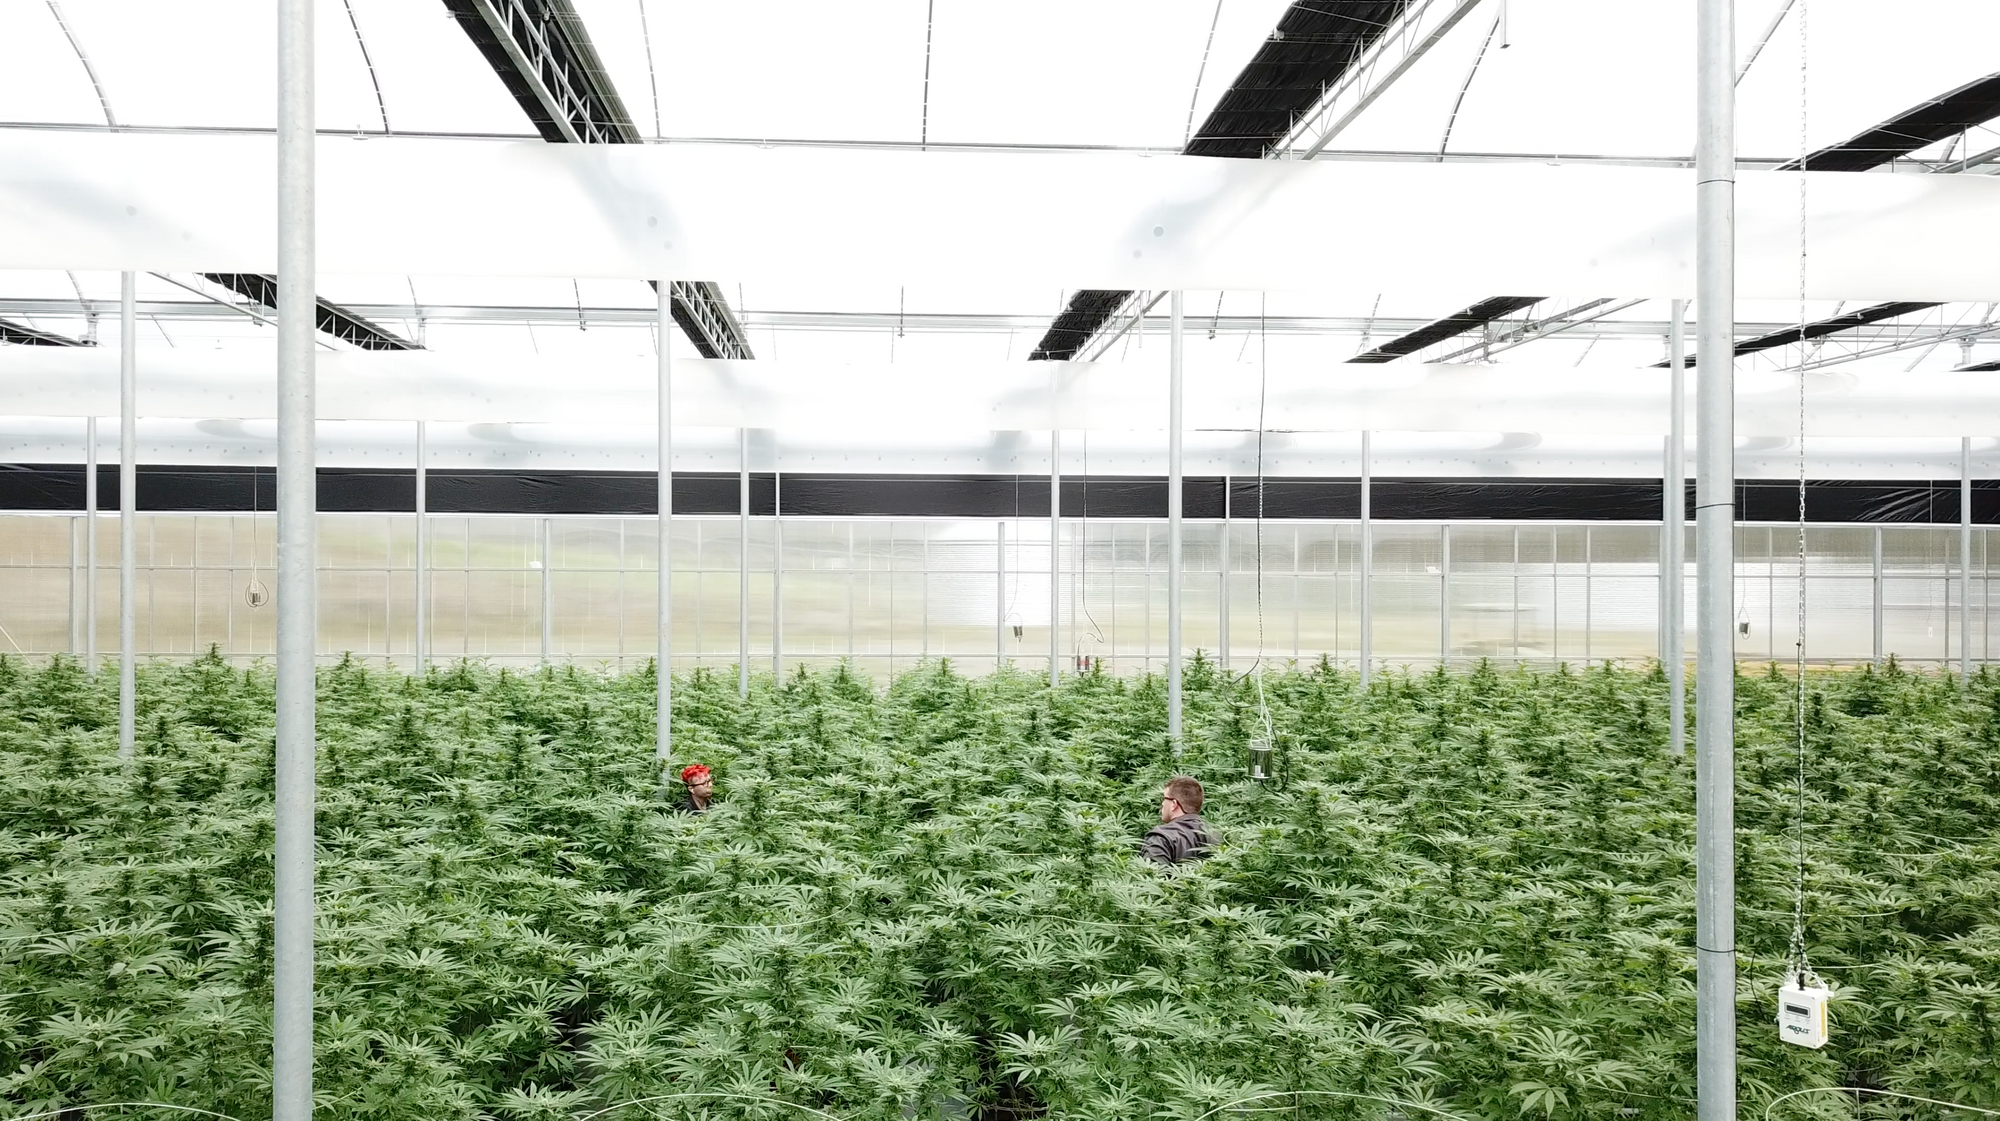 Tantalus Labs uses Elevated Signals Seed-to-sale software